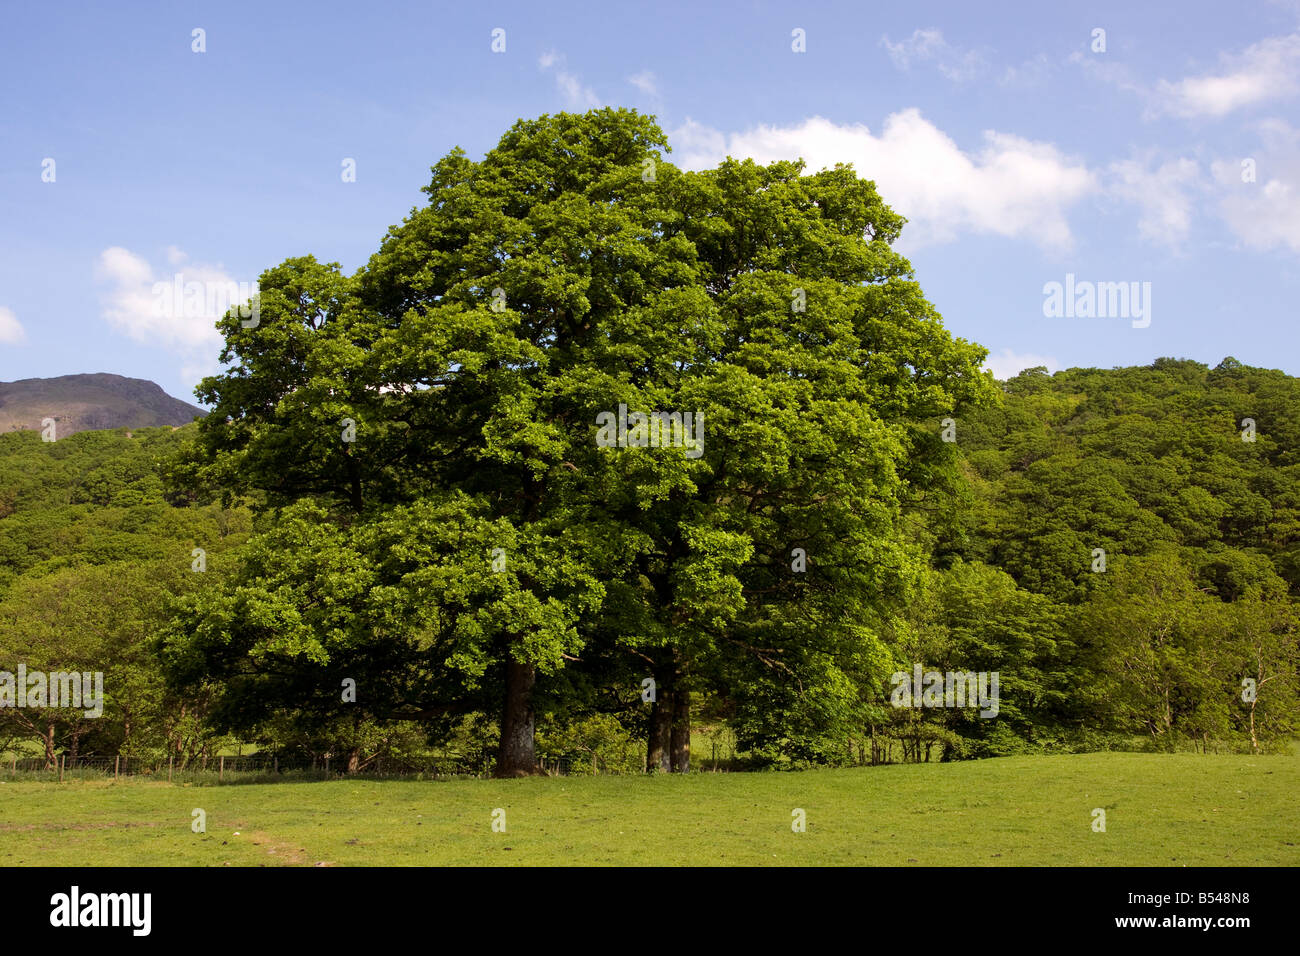 summer trees and landscape in the borrowdale valley near seatoller in the english lake district Stock Photo